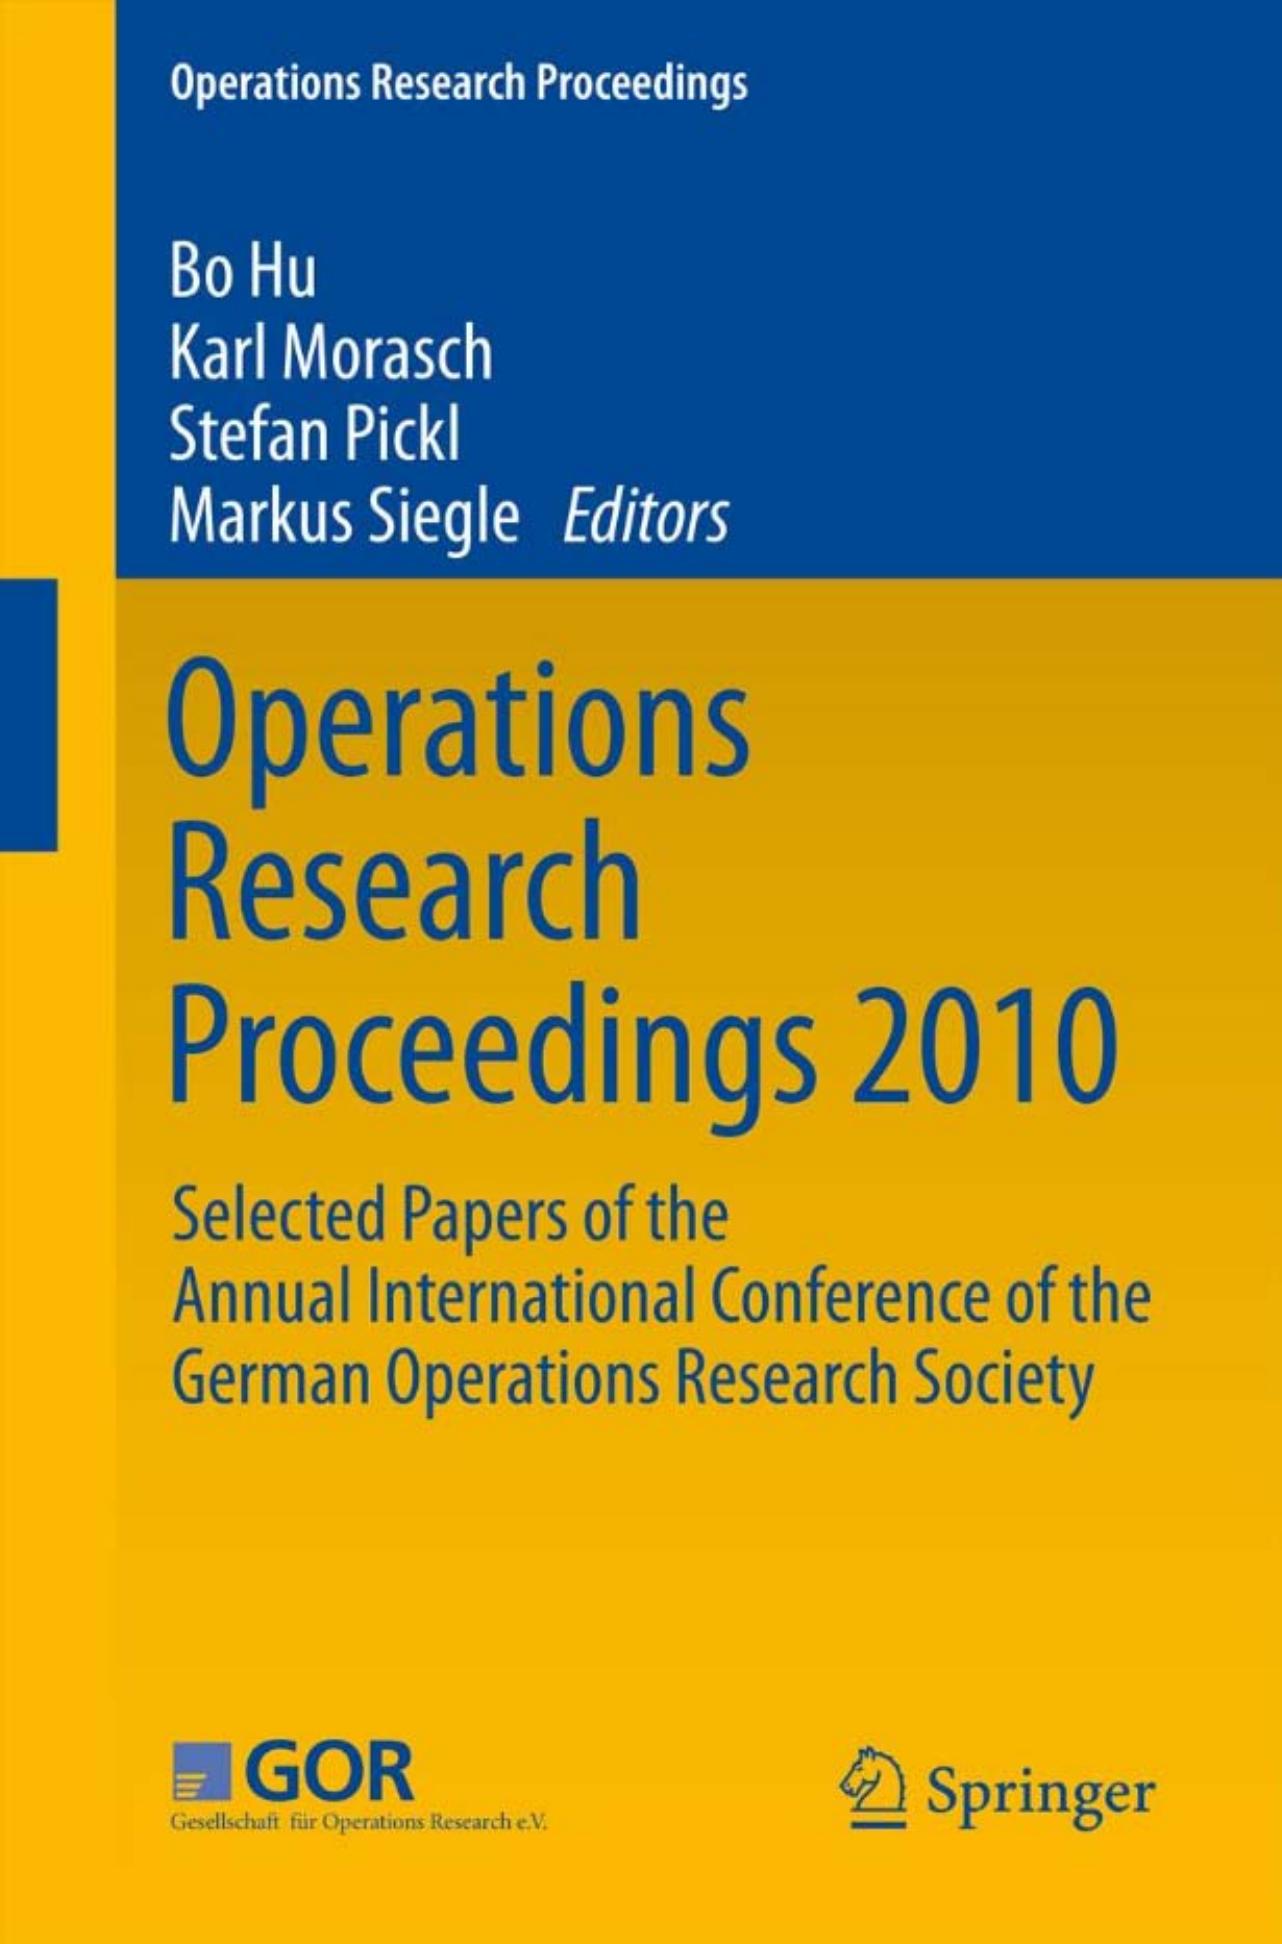 Operations Research Proceedings 2010: Selected Papers of the Annual International Conference of the German Operations Research Society